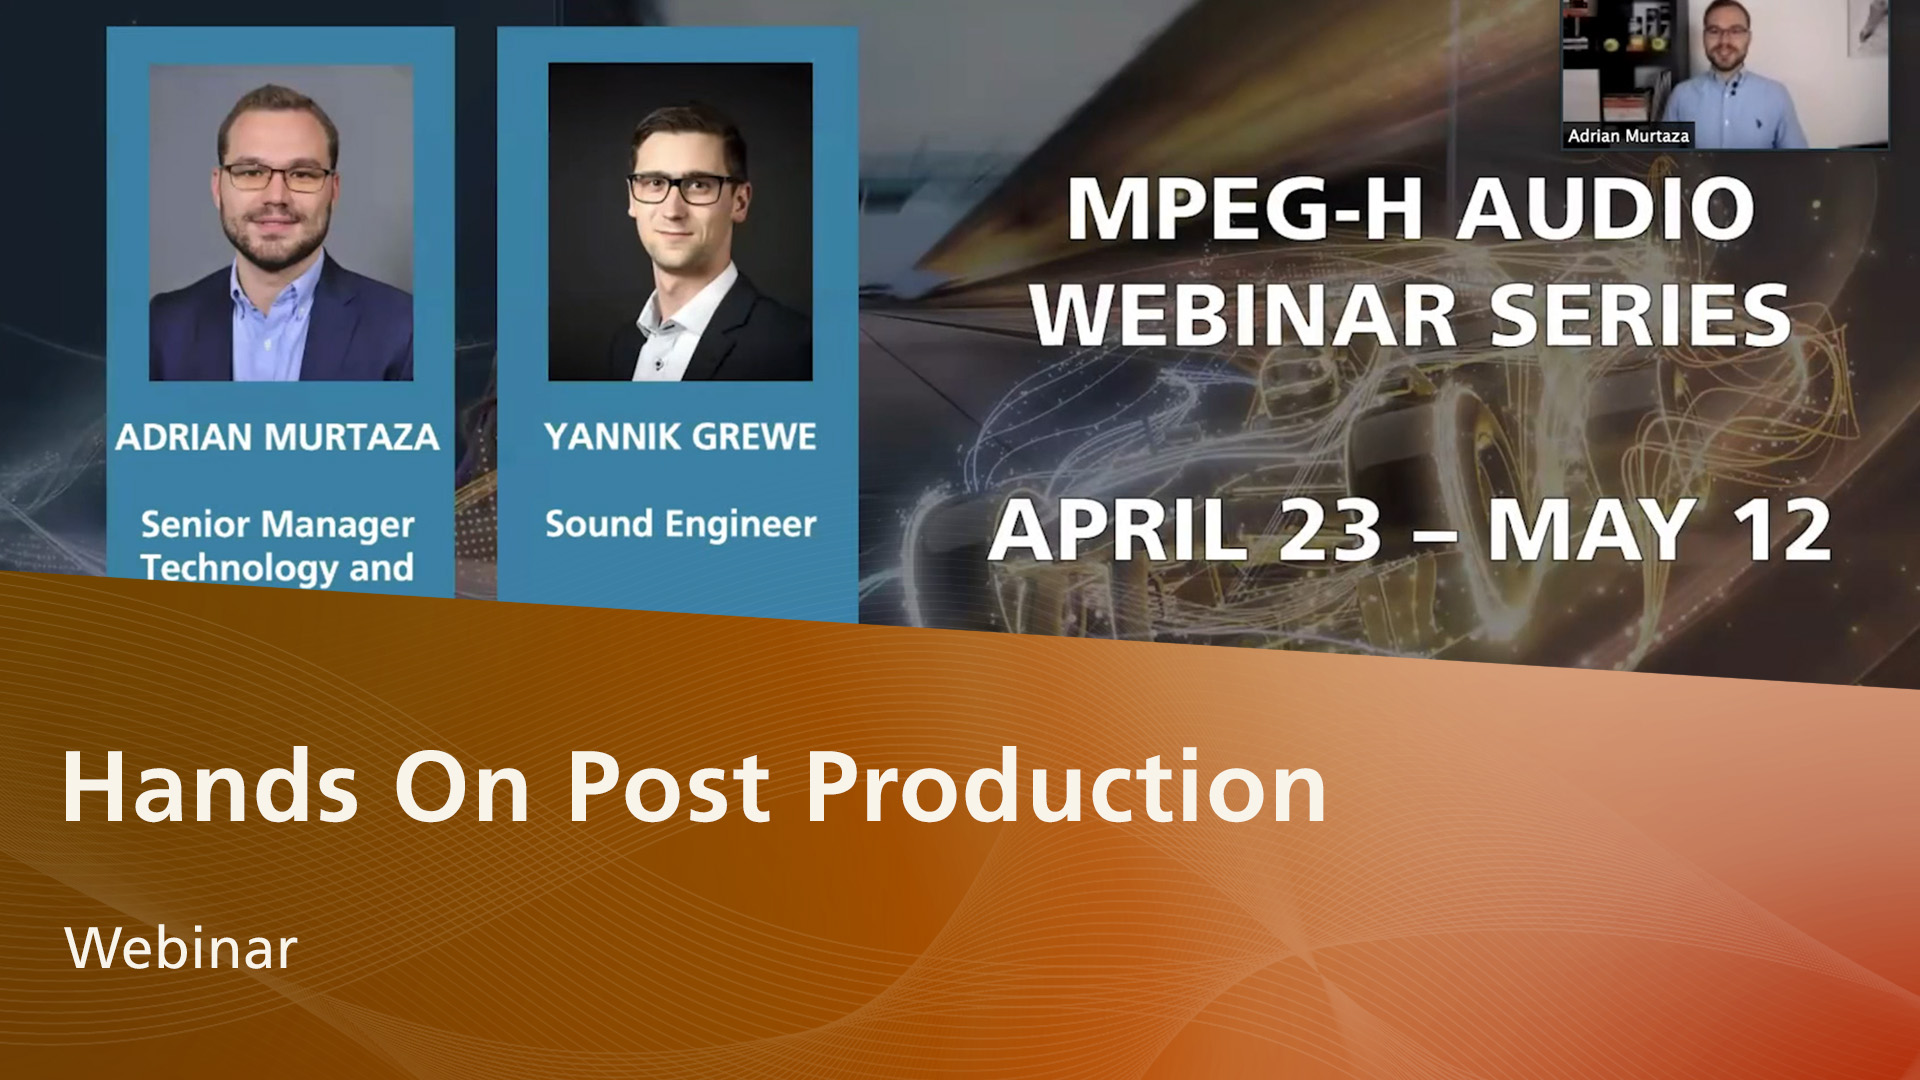 Video MPEG-H Audio Webinar Hands On Post Production